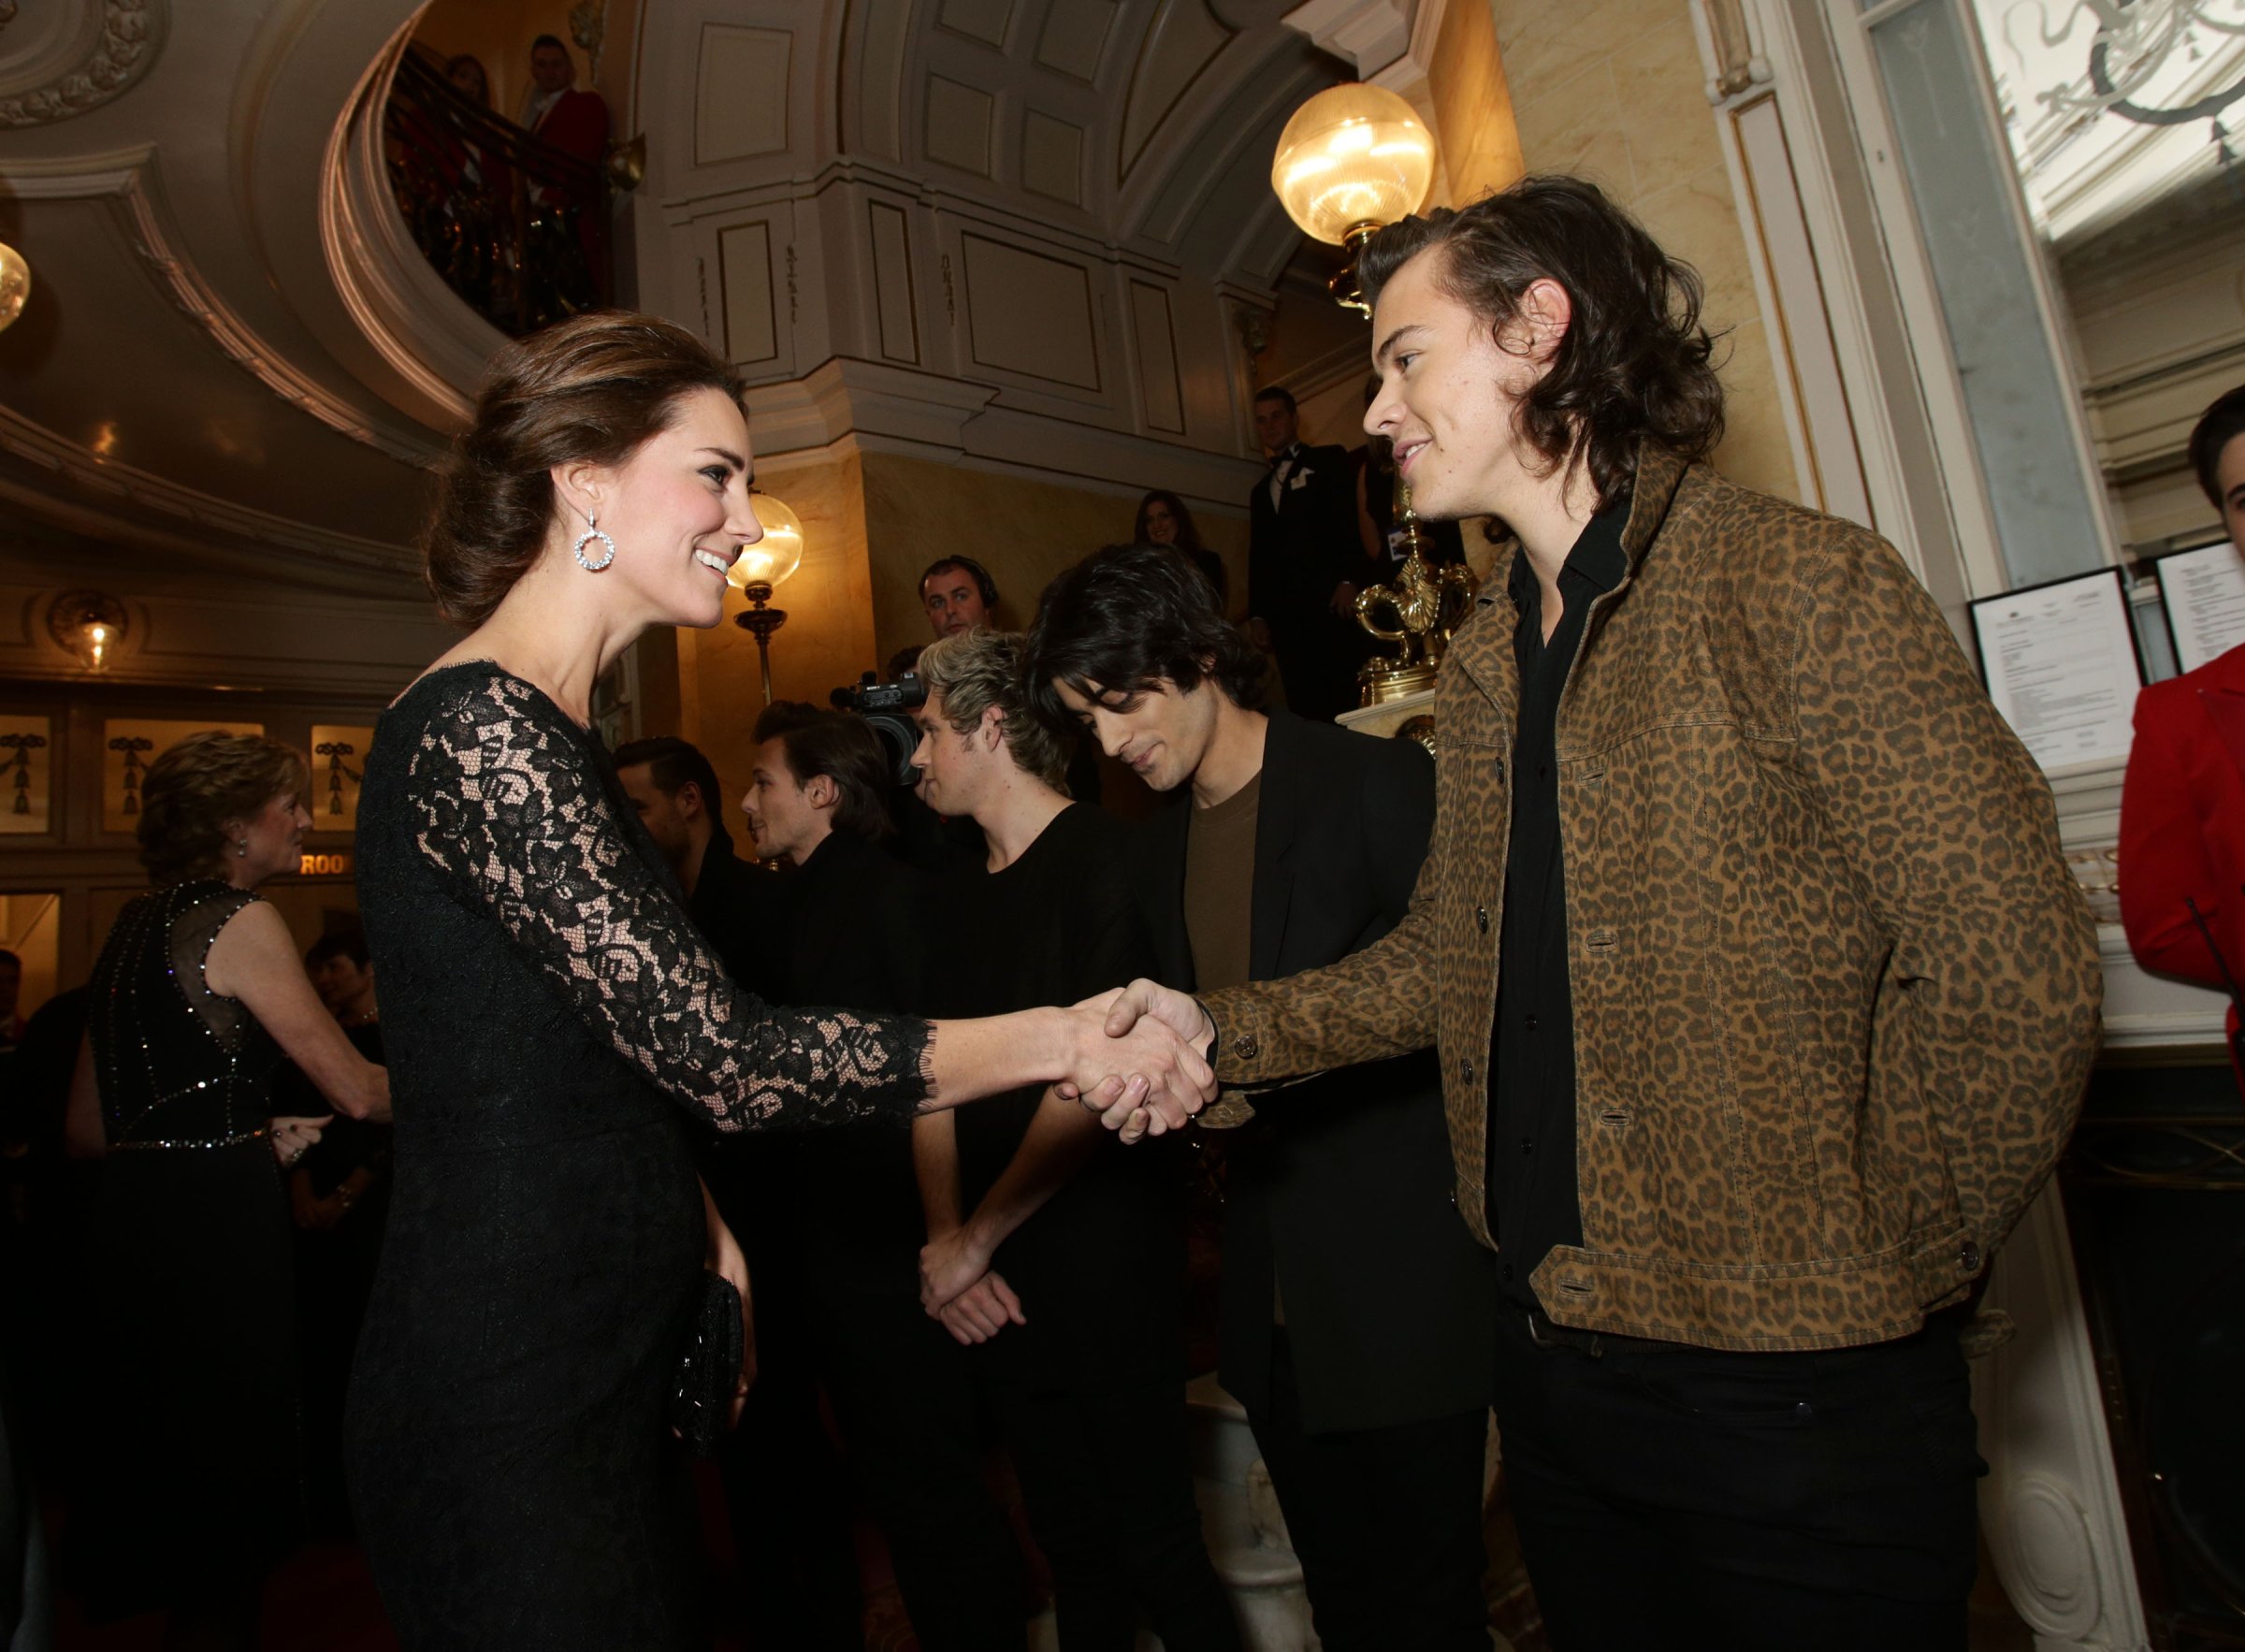 The Duke And Duchess Of Cambridge Attend The Royal Variety Performance